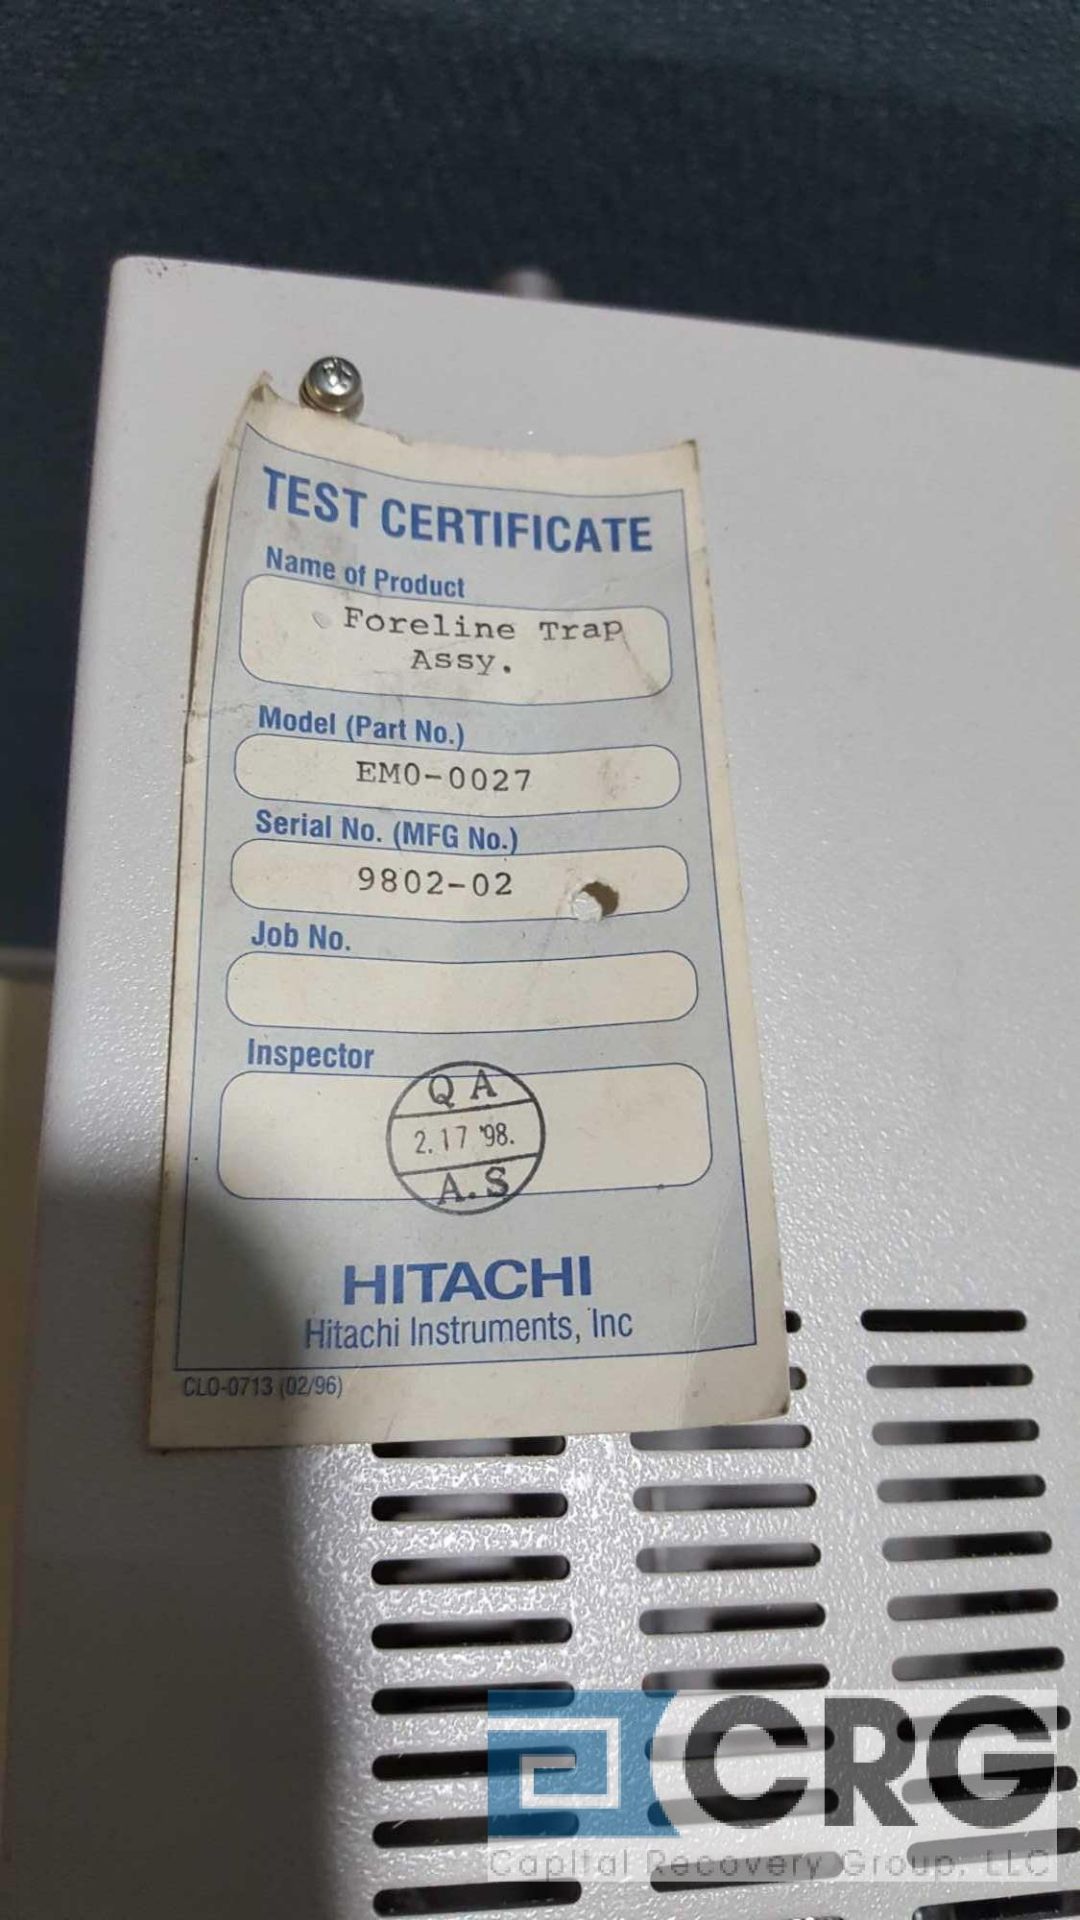 Hitachi, HFT-2, Foreline trap, serial number 9802-02 - Image 2 of 2